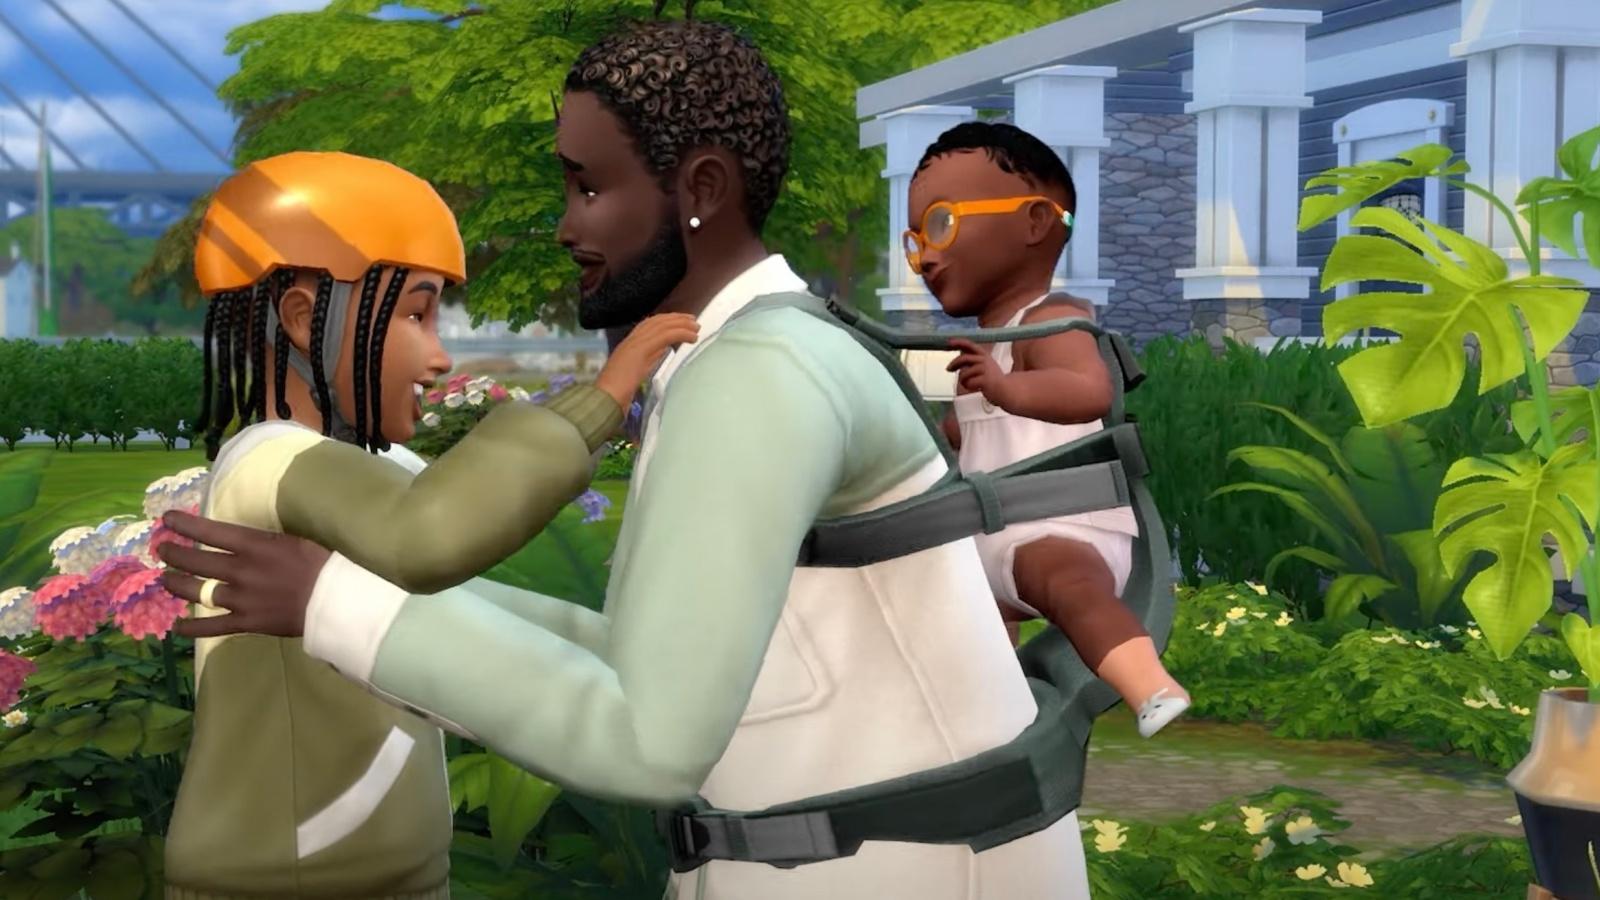 The Sims 4 Growing Together Expansion Pack: Official Reveal